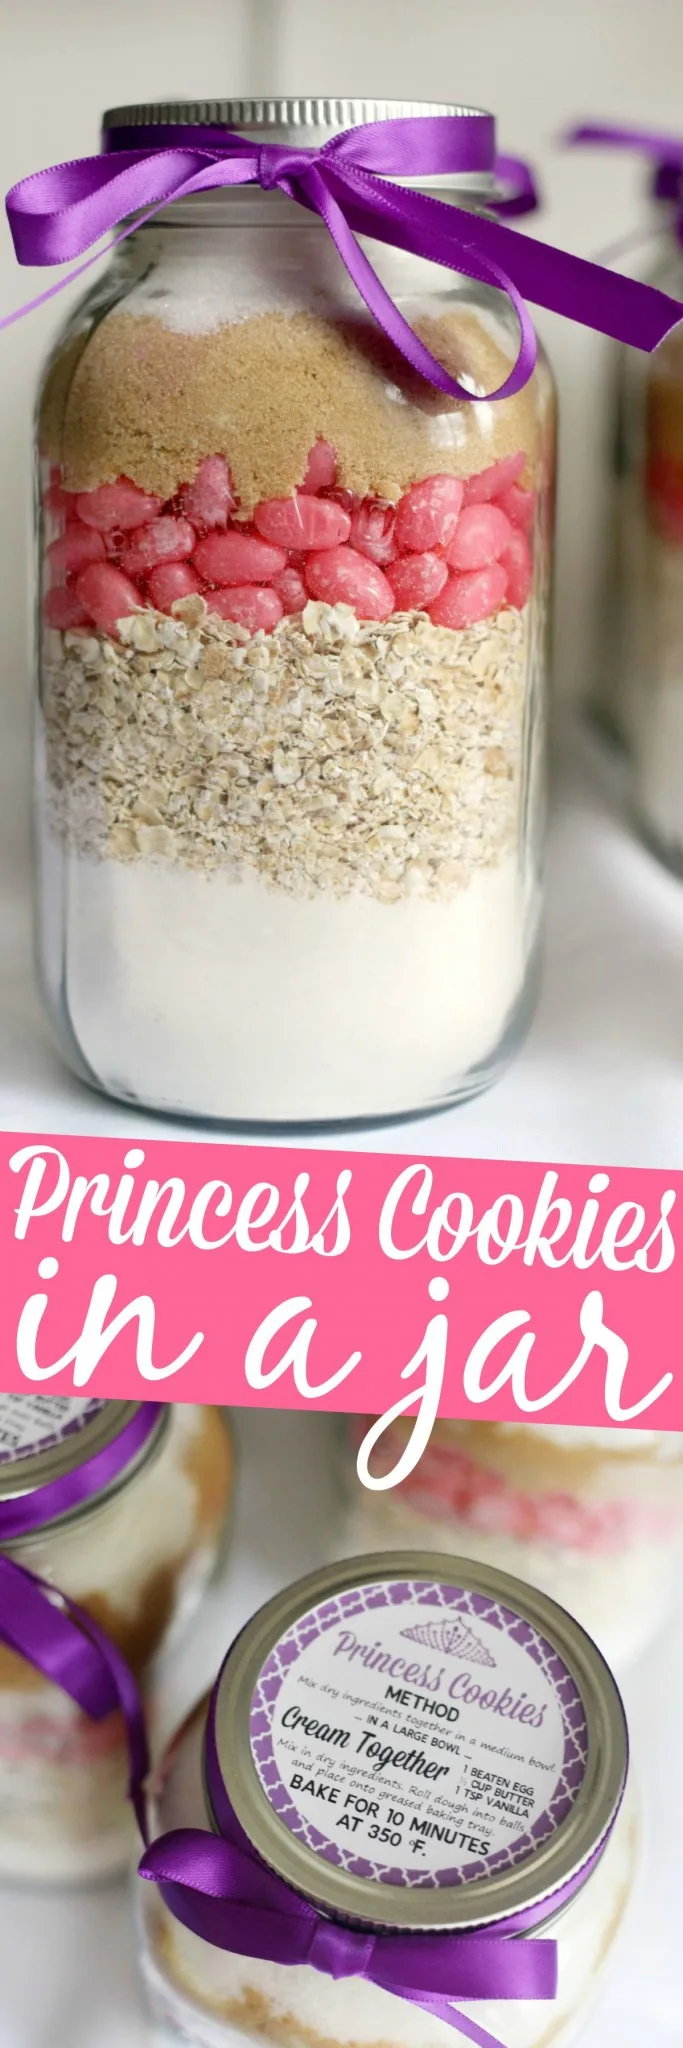 Princess Cookies in a Jar are a fun party favour for any princess themed party. Your guests will love making their own yummy cookies at home!